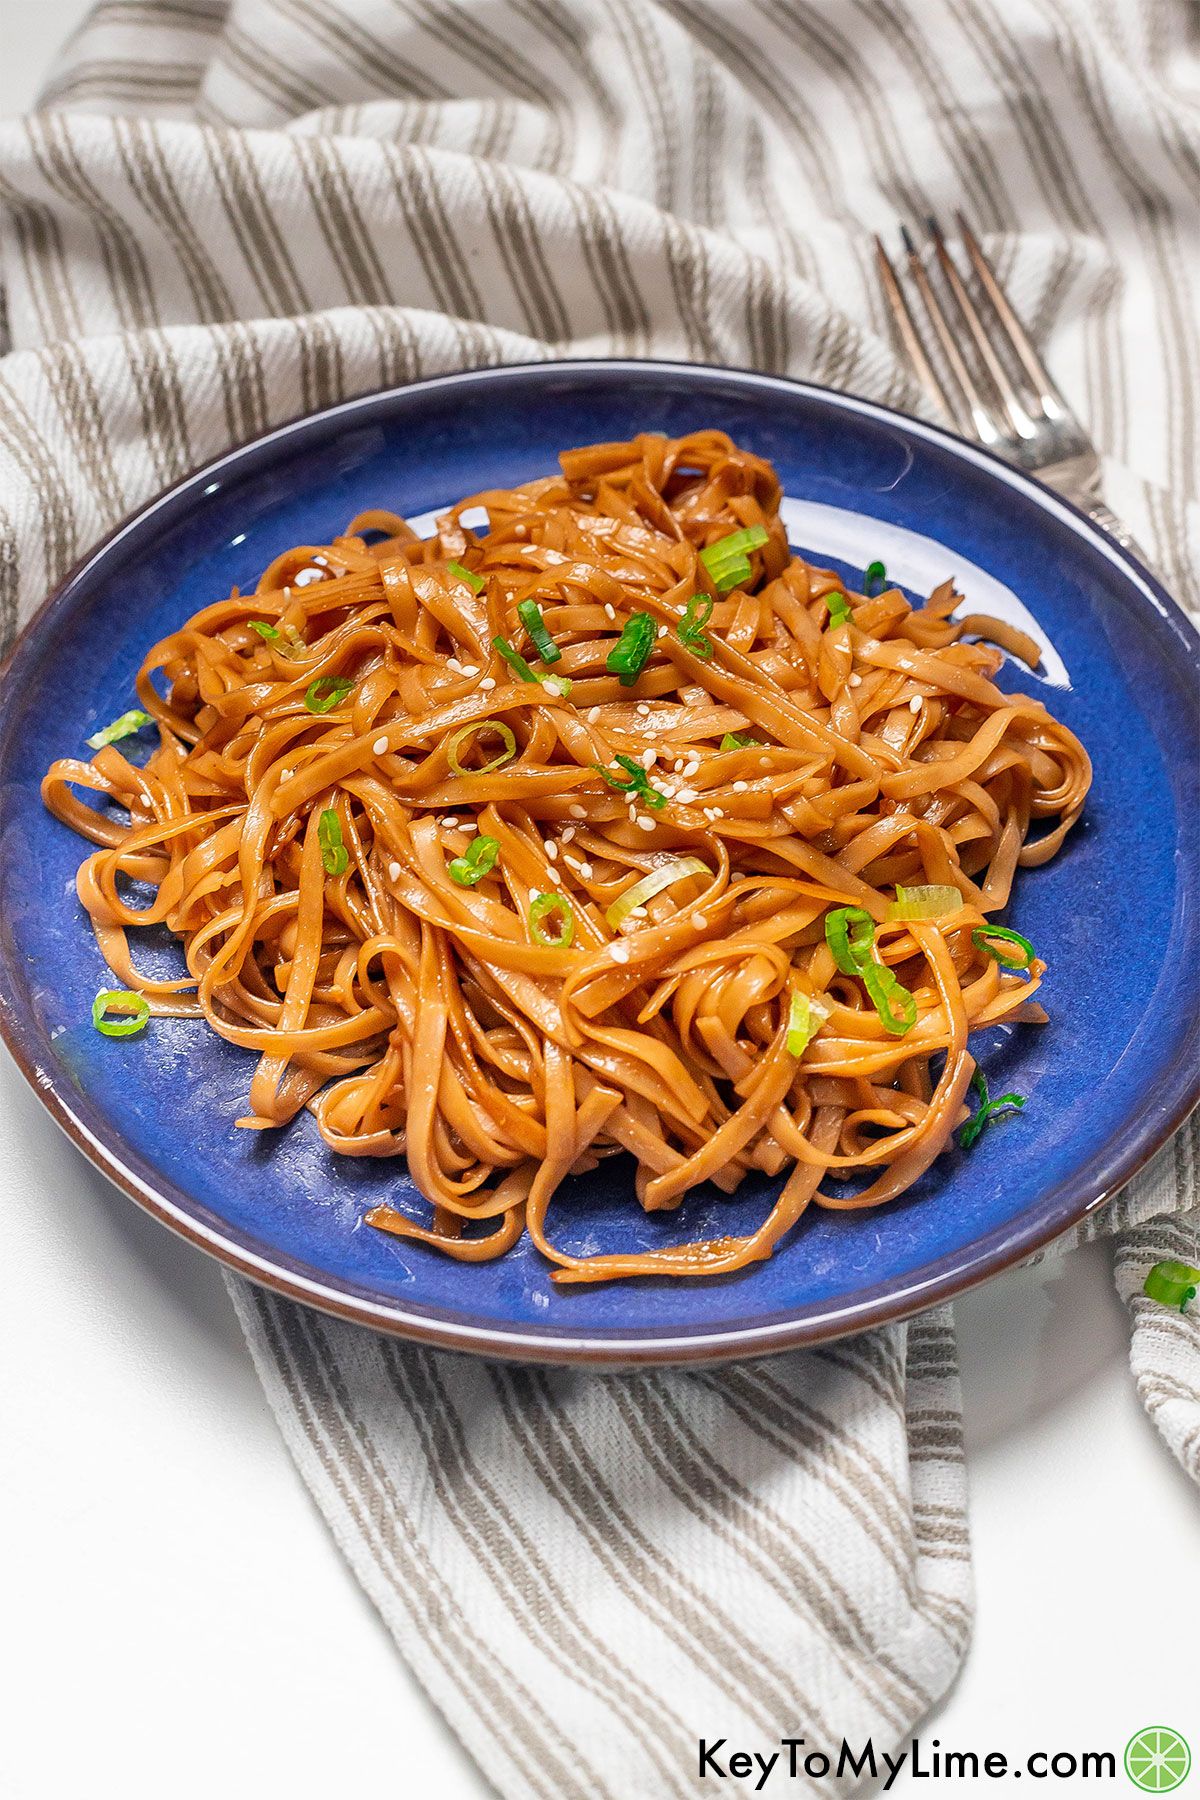 A plate of noodles coated in teriyaki sauce on top of a napkin.